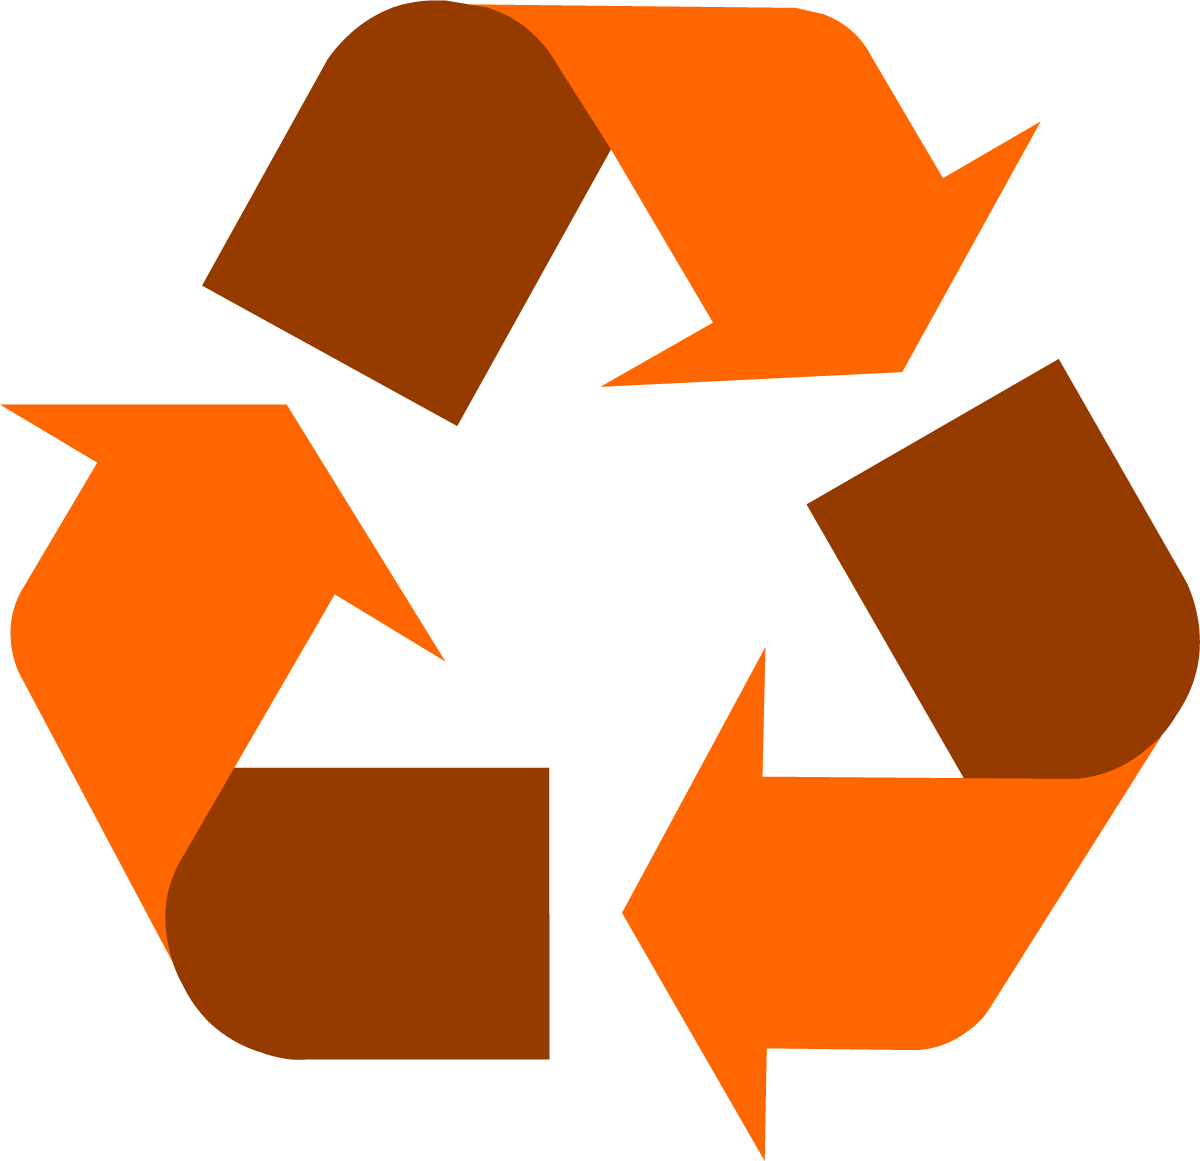 Recycle icons | Noun Project